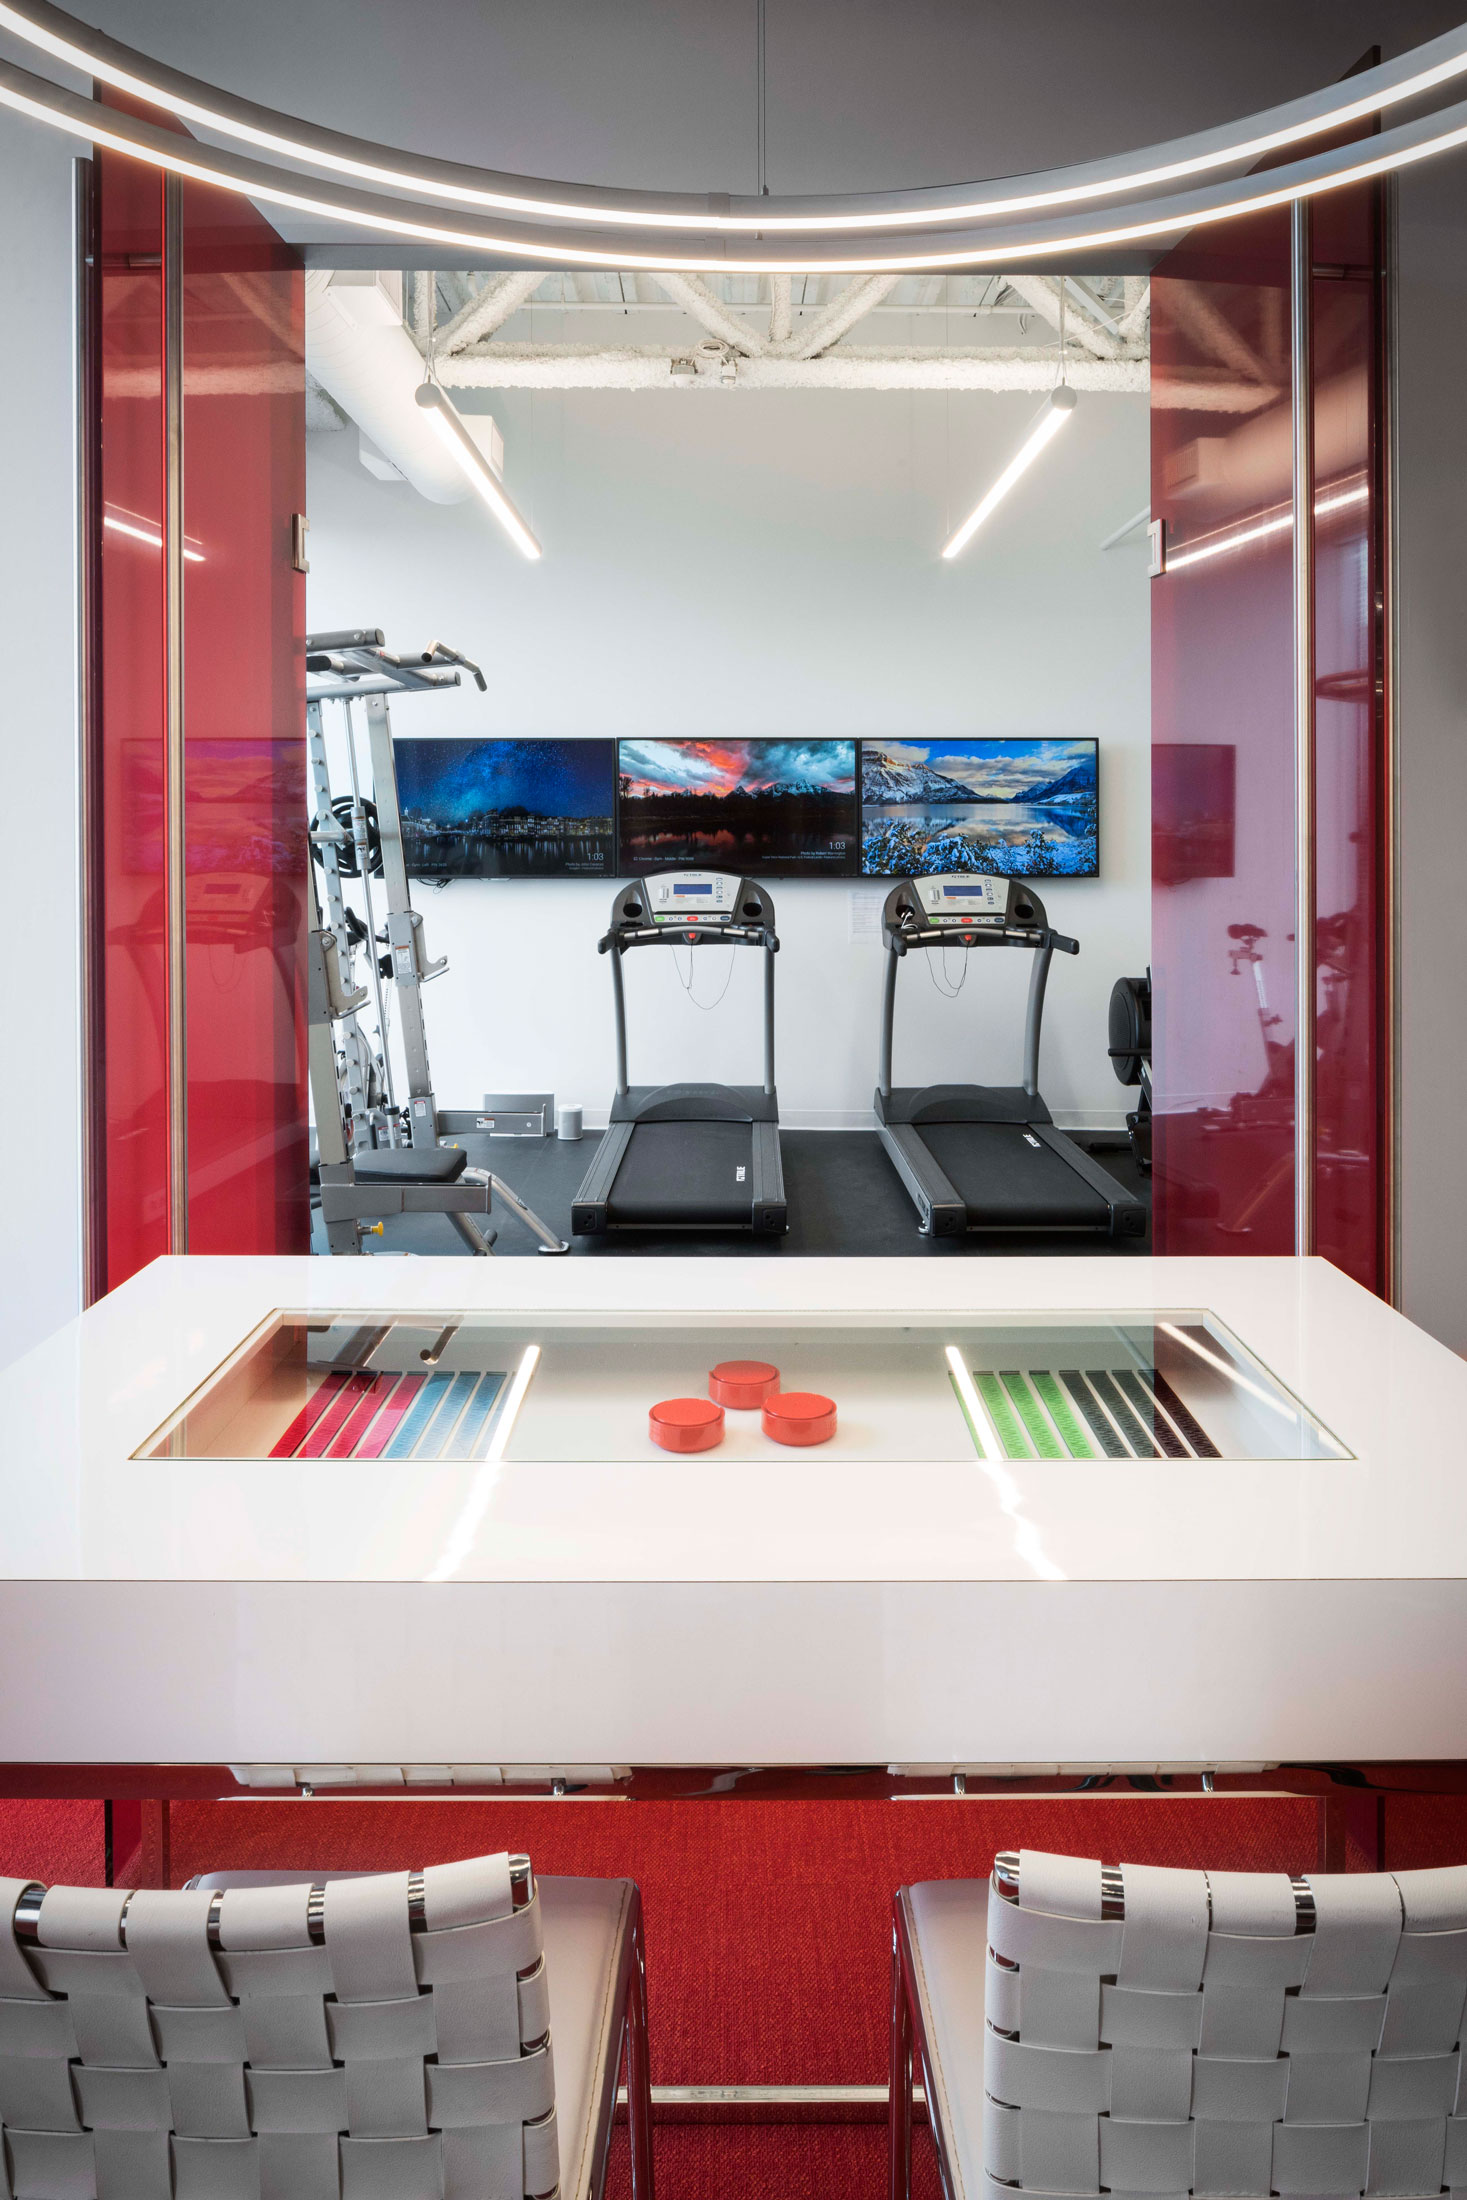 Looking over a device display case into an exercise room